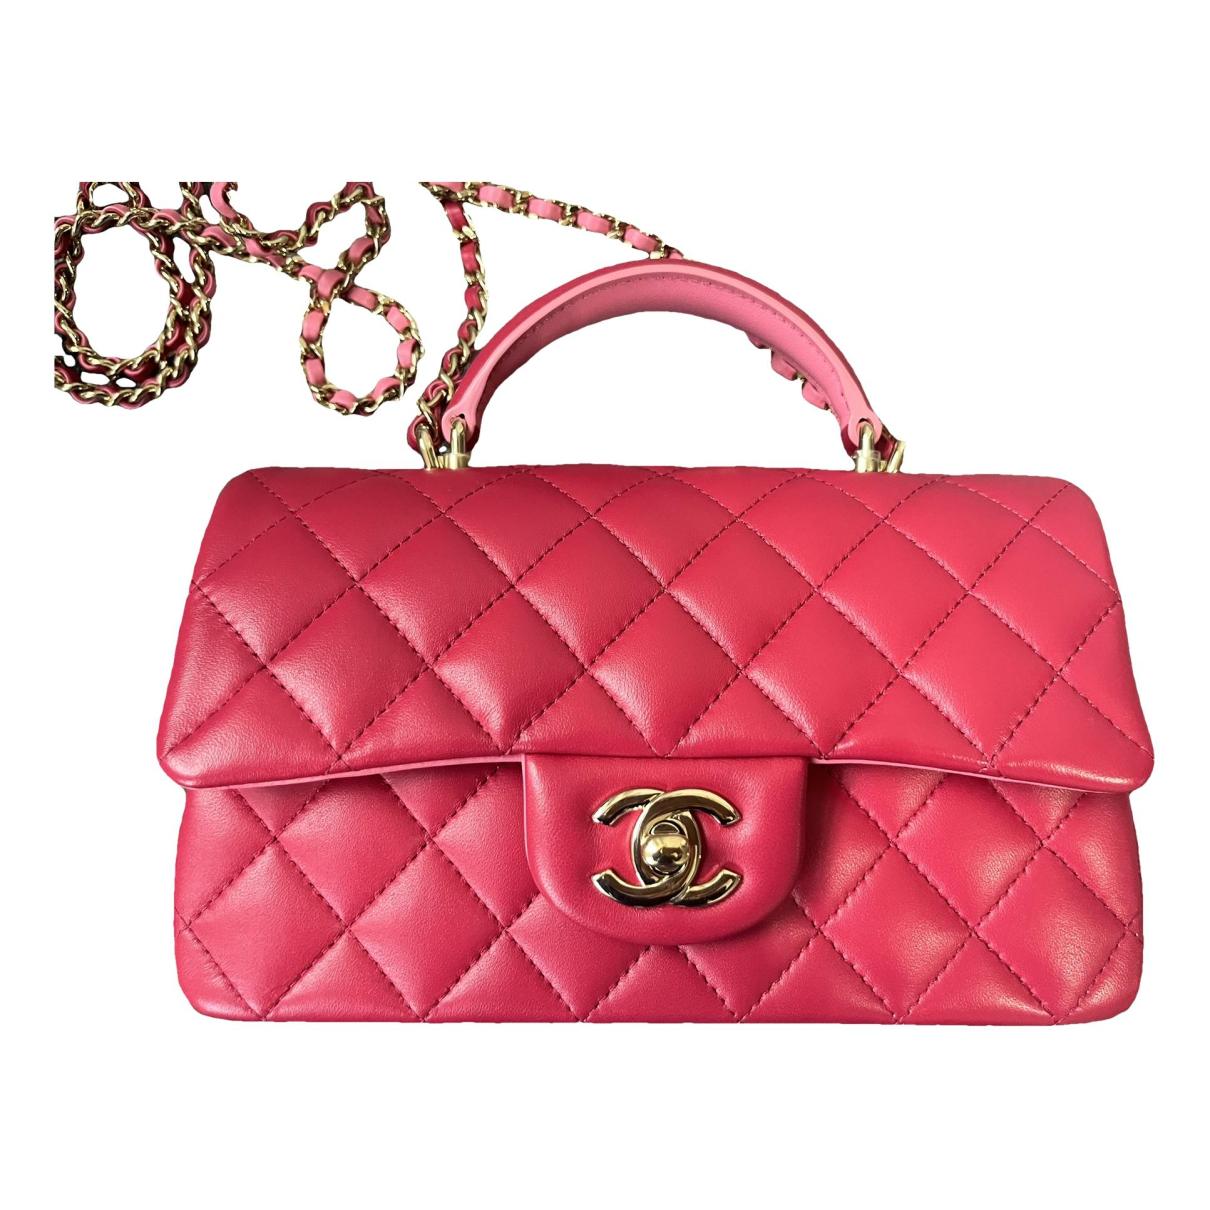 Chain infinity leather handbag Chanel Pink in Leather - 31030749